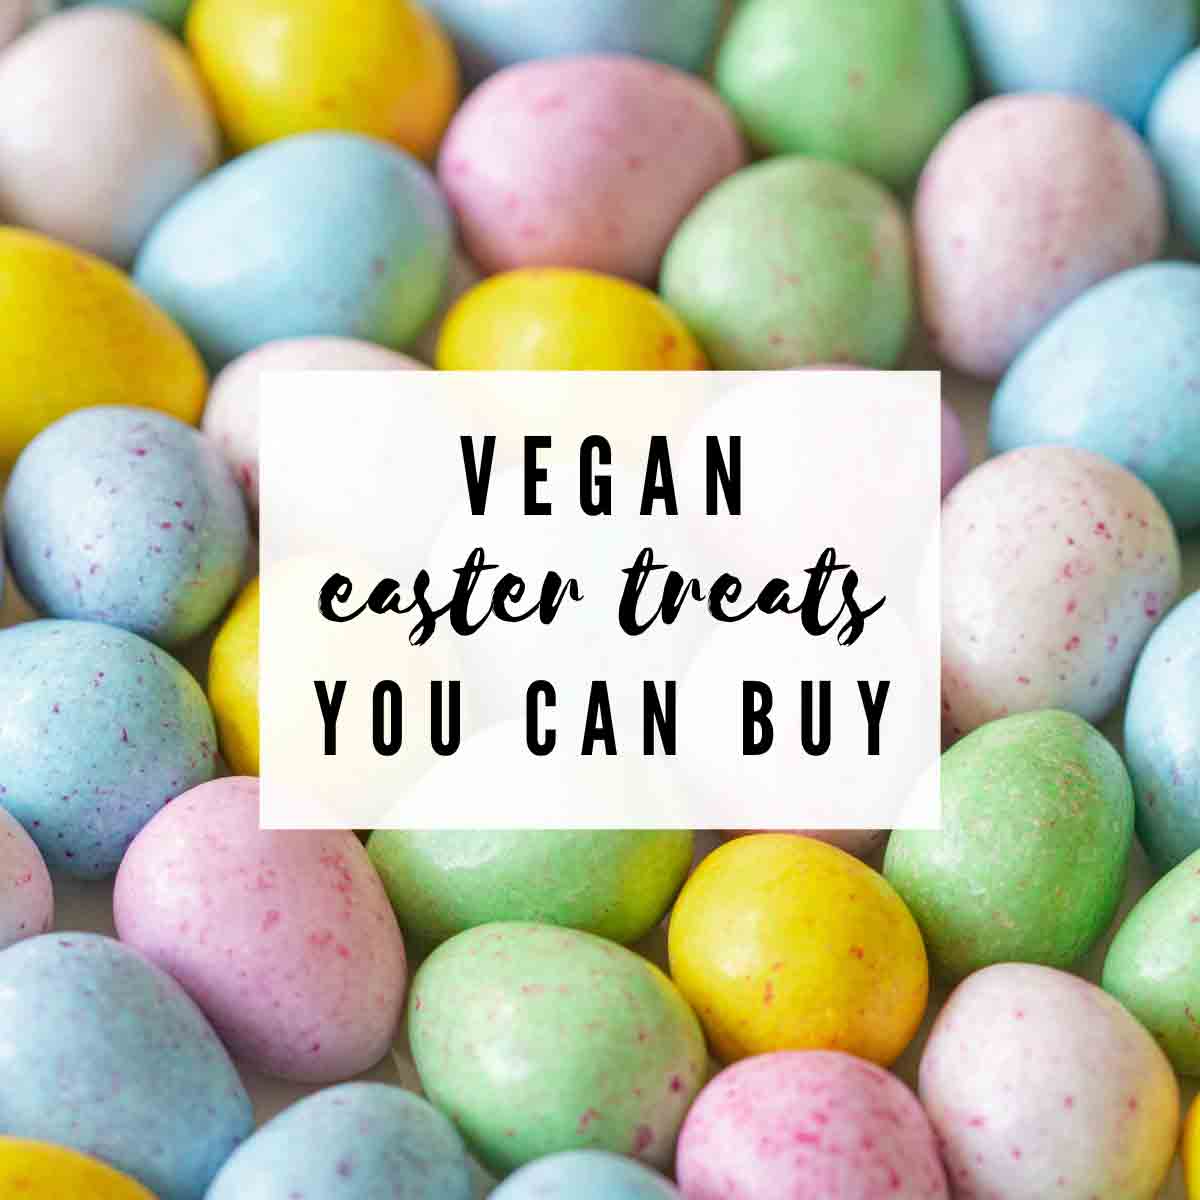 Mini Eggs Image With Text Overlay That Reads 'vegan Easter Treats That You Can Buy'